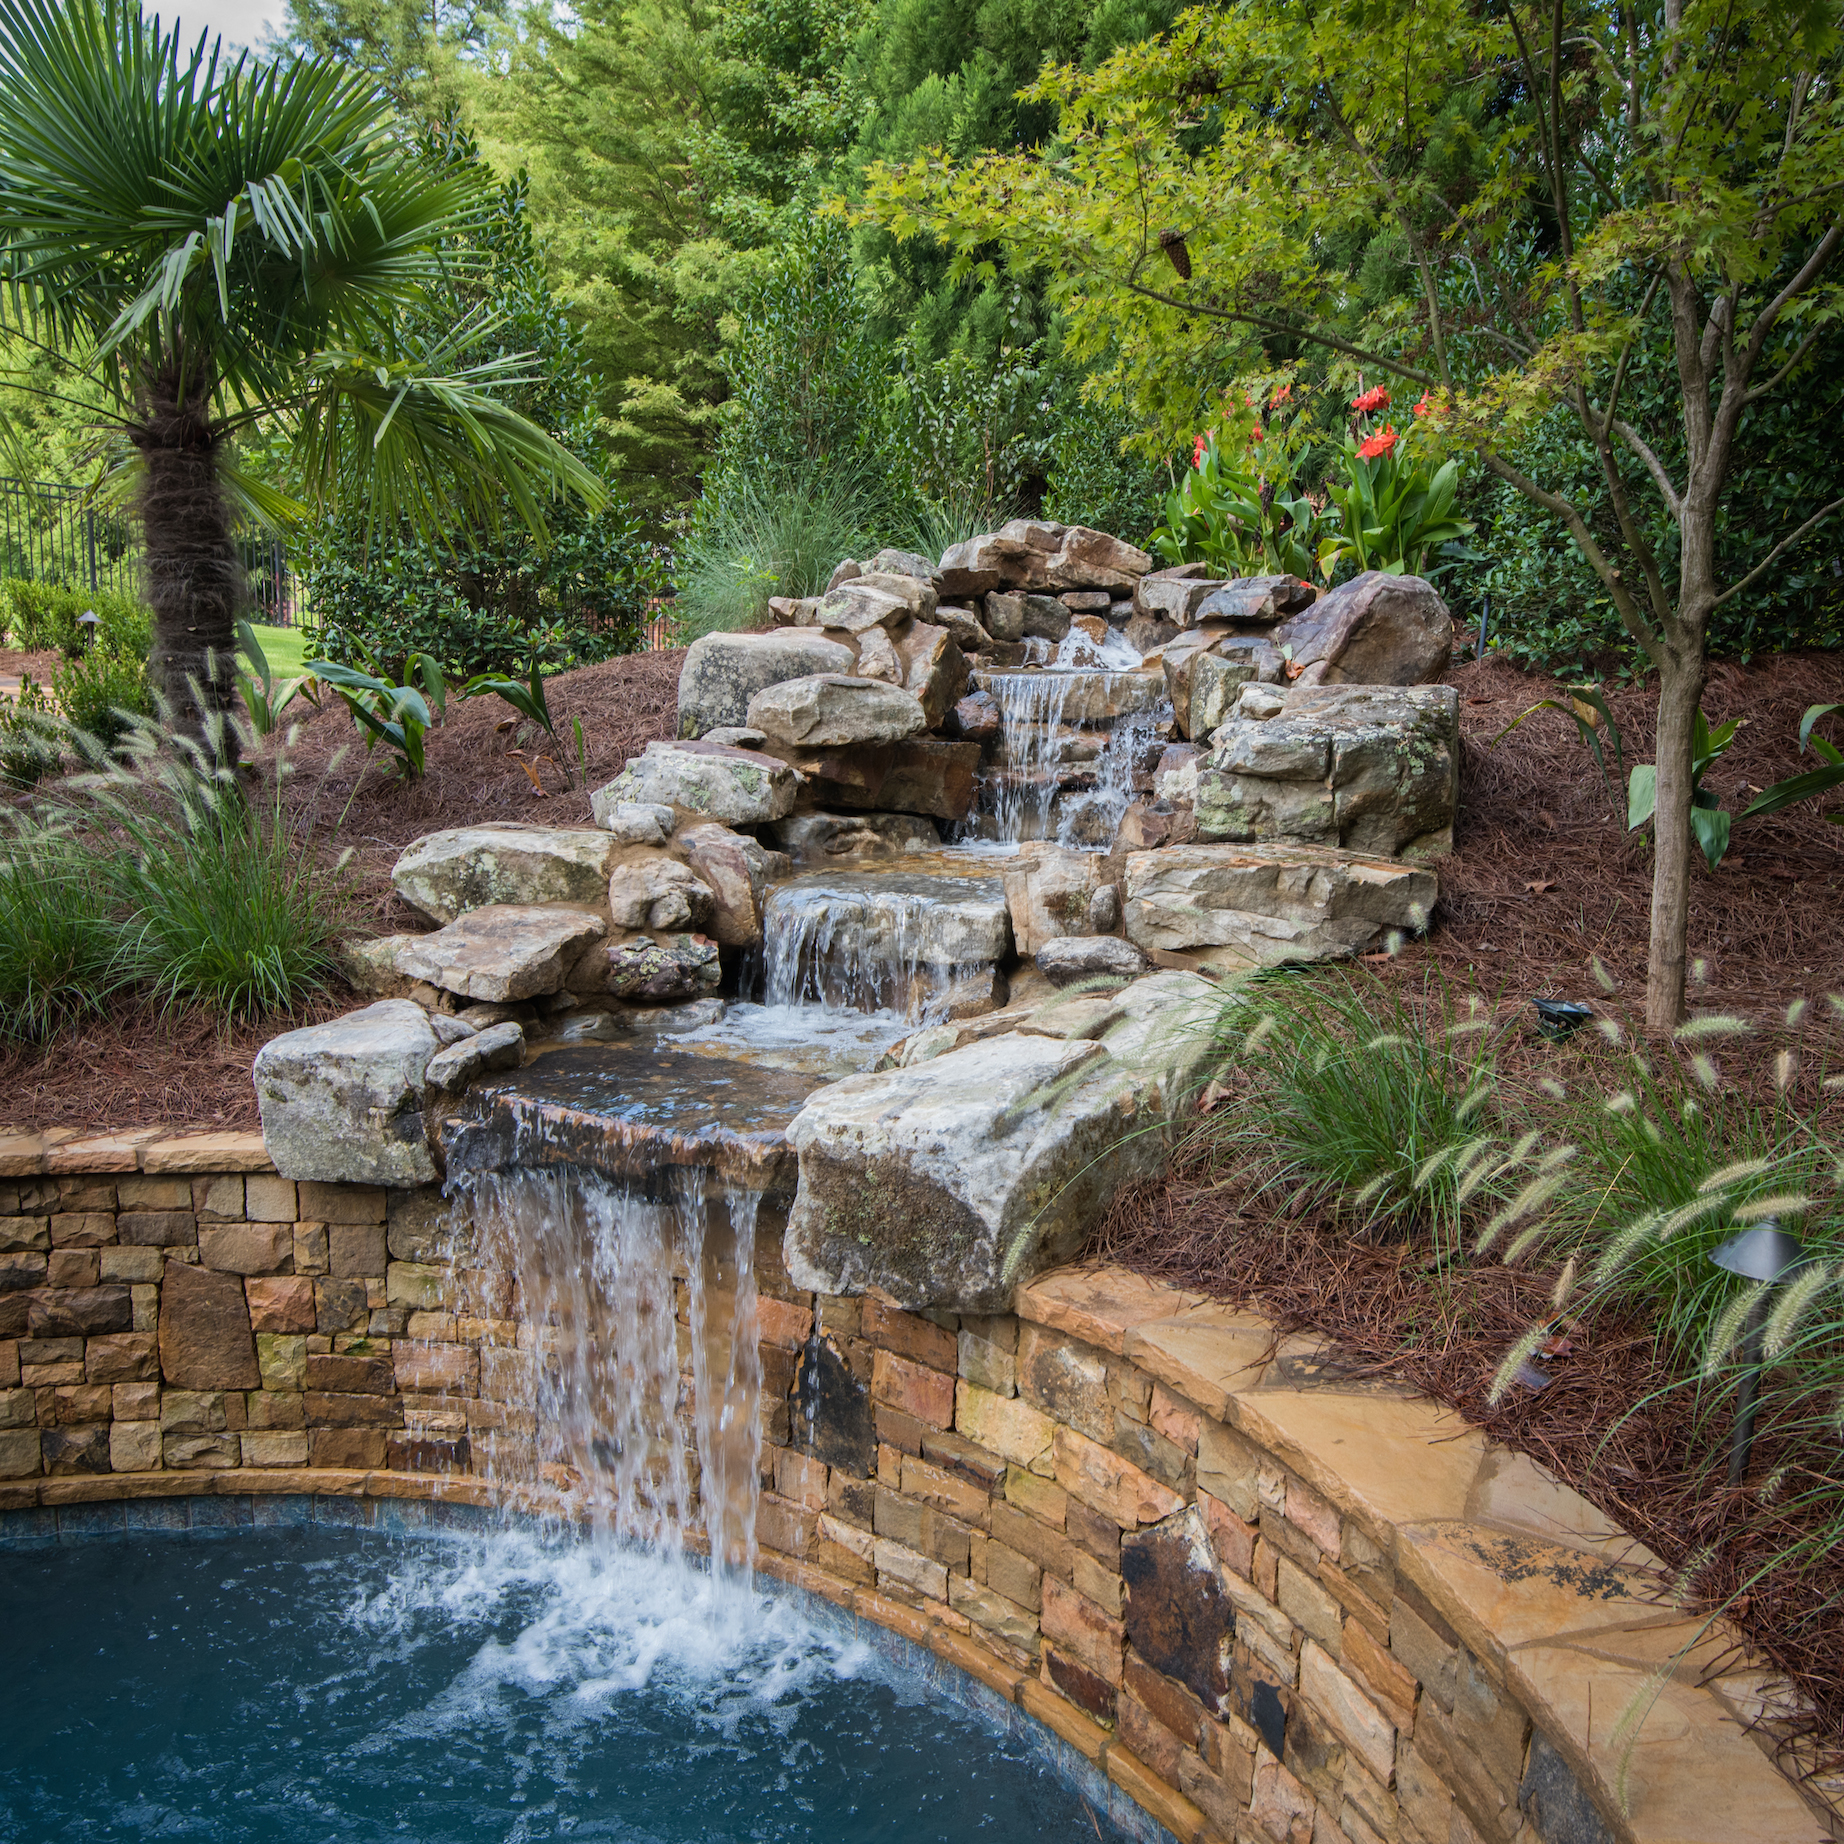 A three-tier boulder waterfall flowing into a swimming pool.